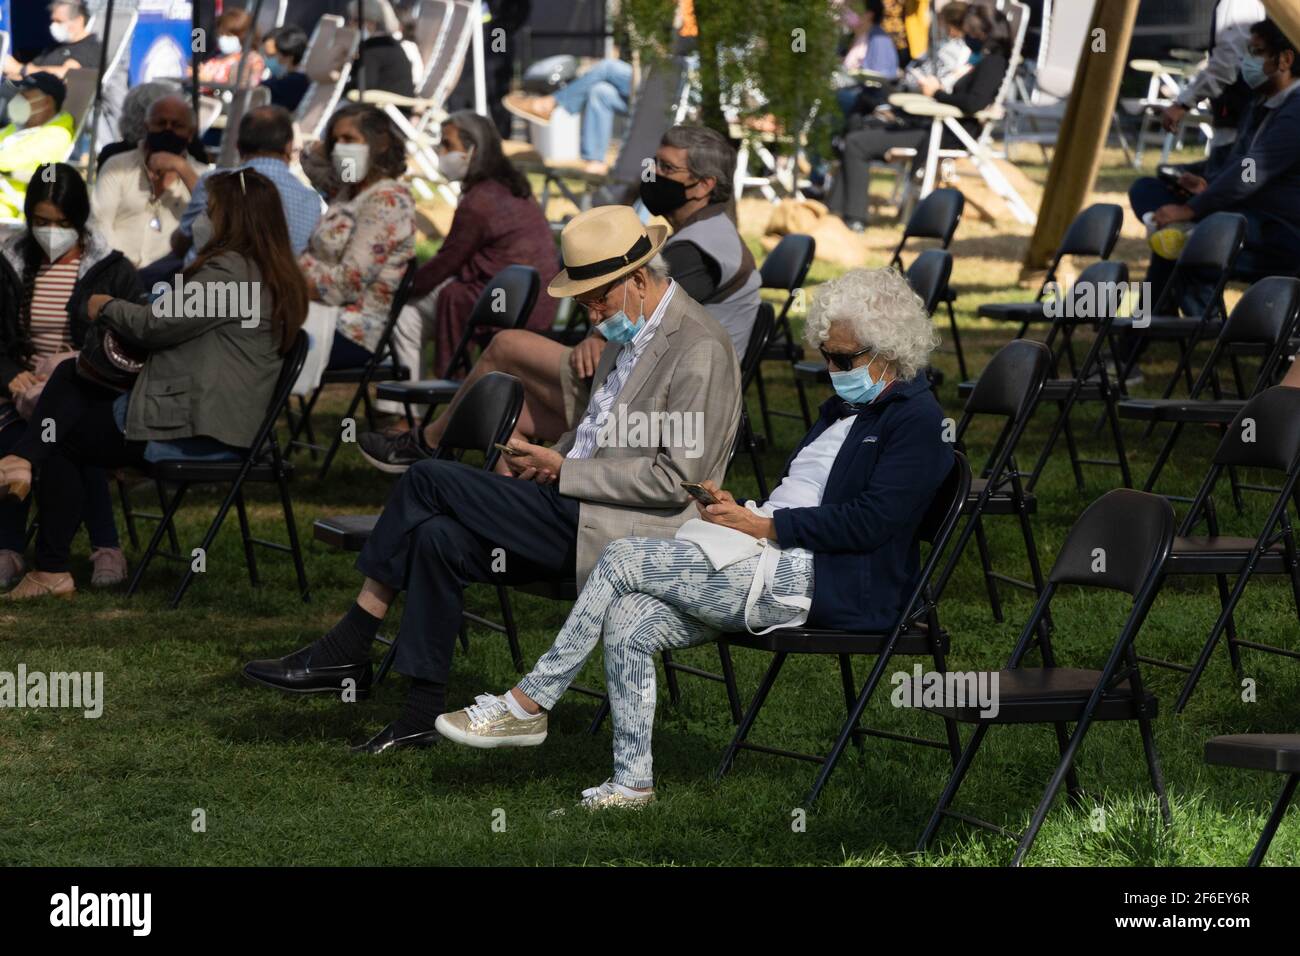 Santiago, Metropolitana, Chile. 31st Mar, 2021. An elderly couple wearing masks waits to receive their Sinovac vaccine against Covid at a vaccination center in Santiago, Chile. Credit: Matias Basualdo/ZUMA Wire/Alamy Live News Stock Photo